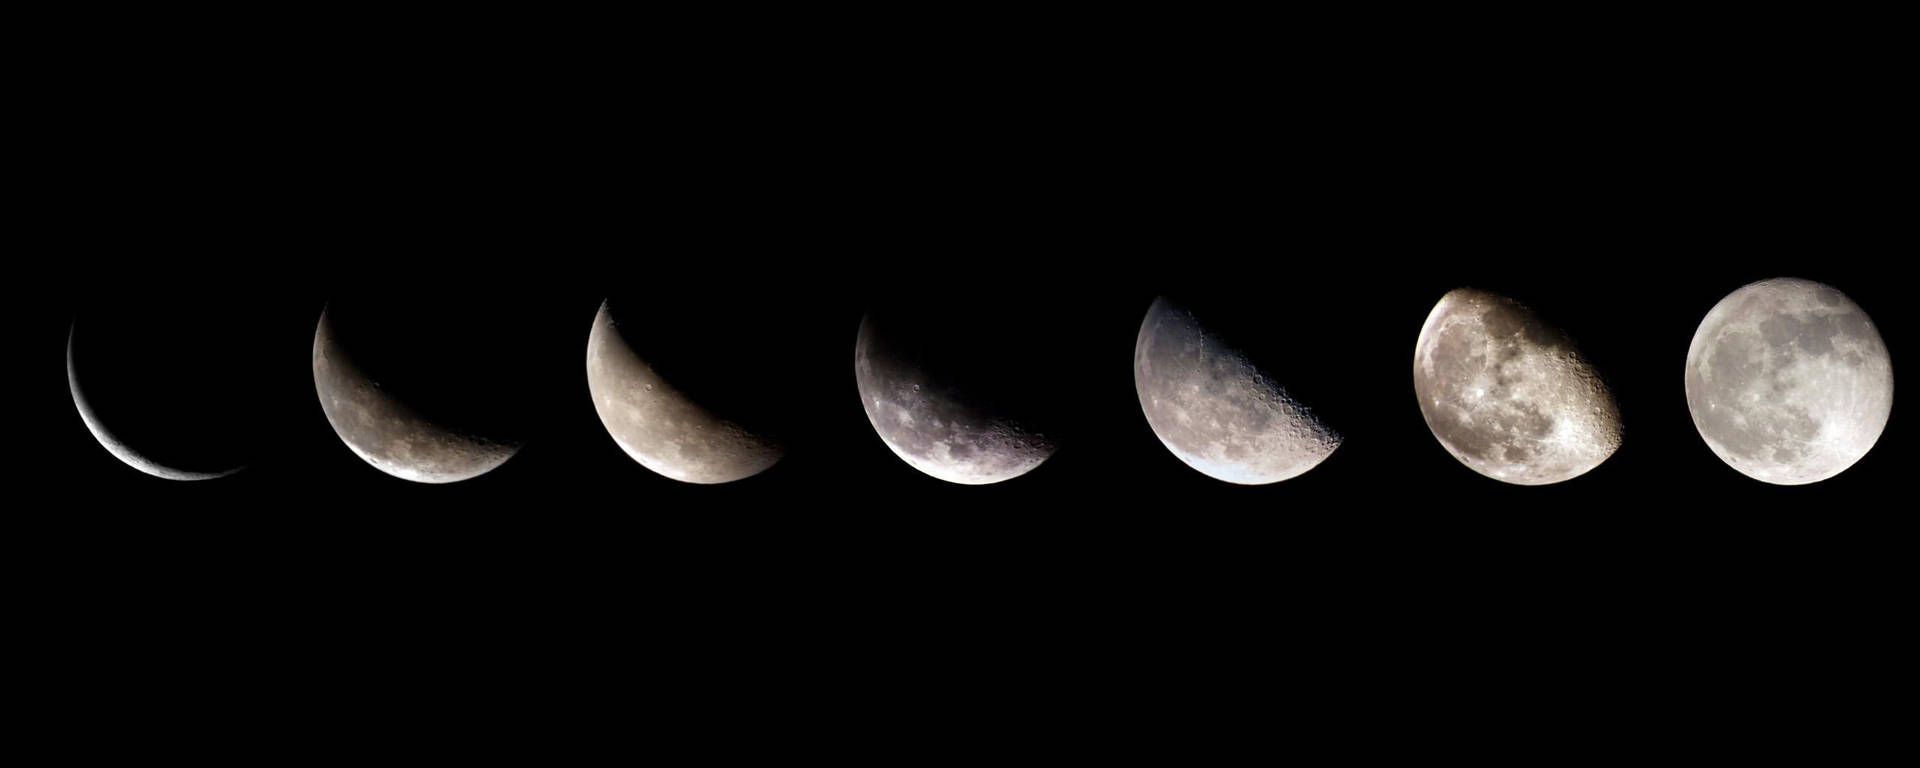 Seven Moon Phases To Full Moon Wallpaper